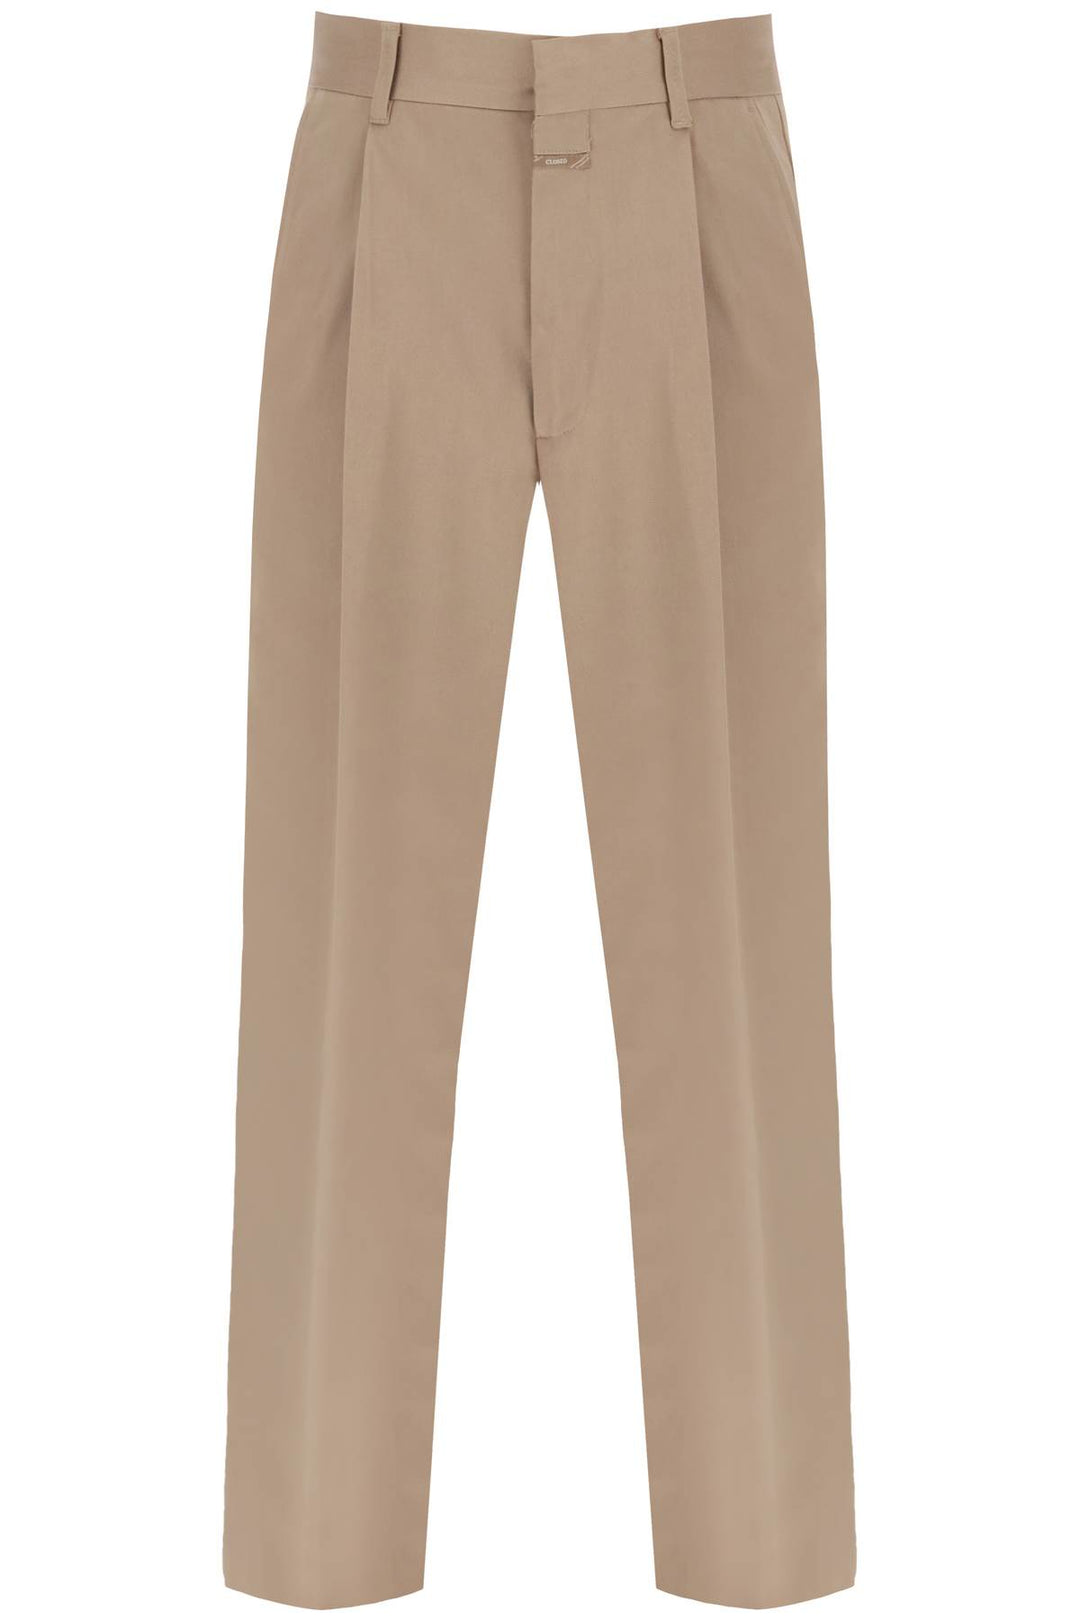 Closed 'blomberg' loose pants with tapered leg-0